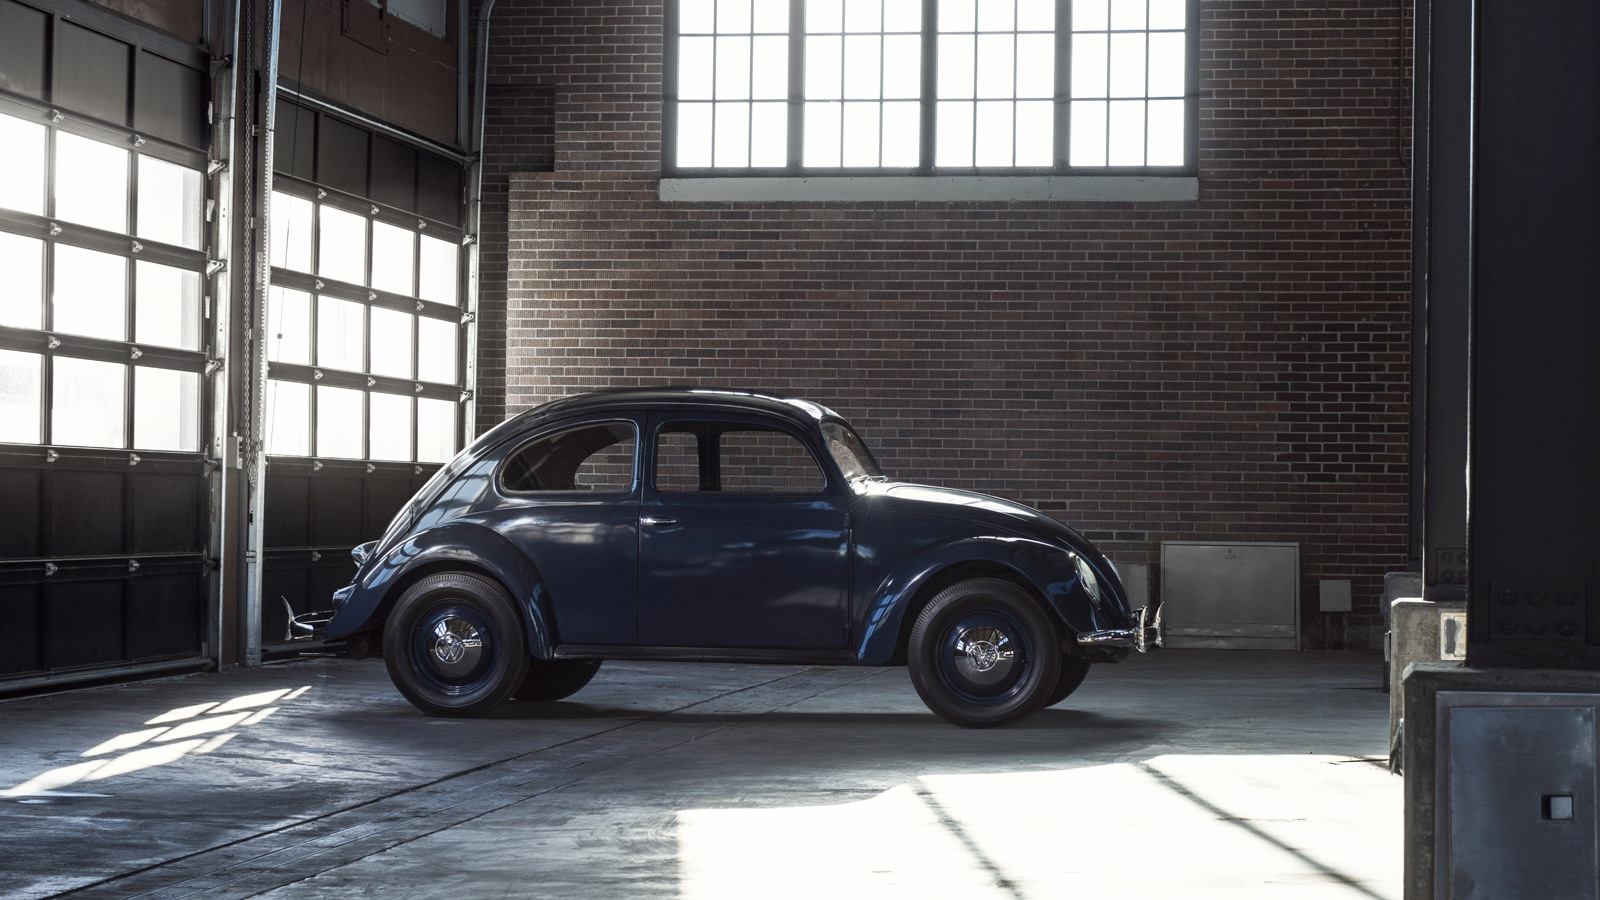 Volkswagen Beetle Celebrates Its 65th Year In The U.S.